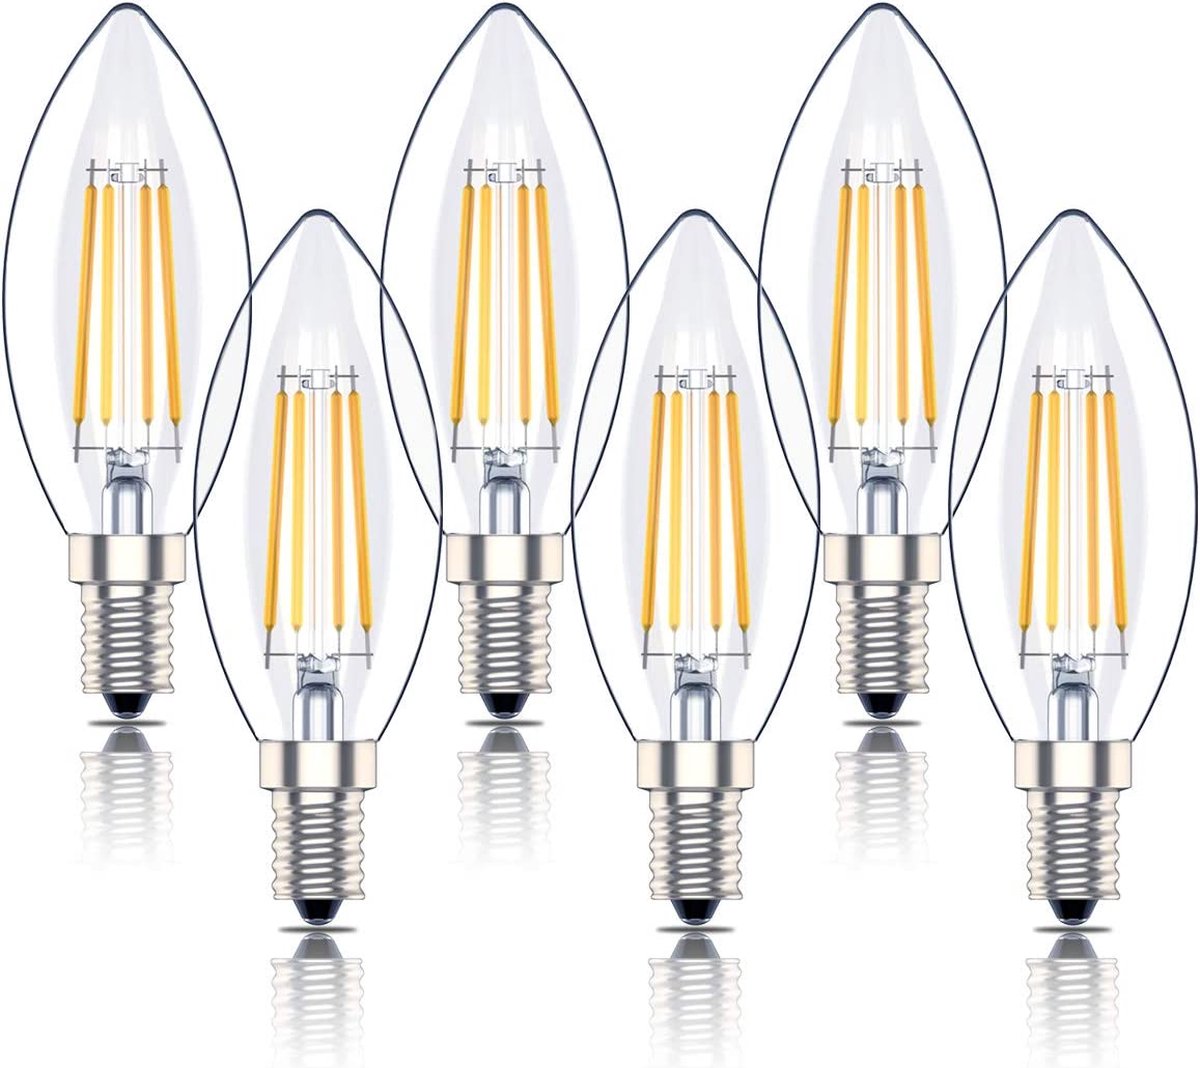 Flightmode- E14 LED Dimmable Candle Bulb, SES C35 Filament Small Edison Screw Light Bulbs, 4w 40W Equivalent, Warm White 2700K, 400lm, Pack of 6